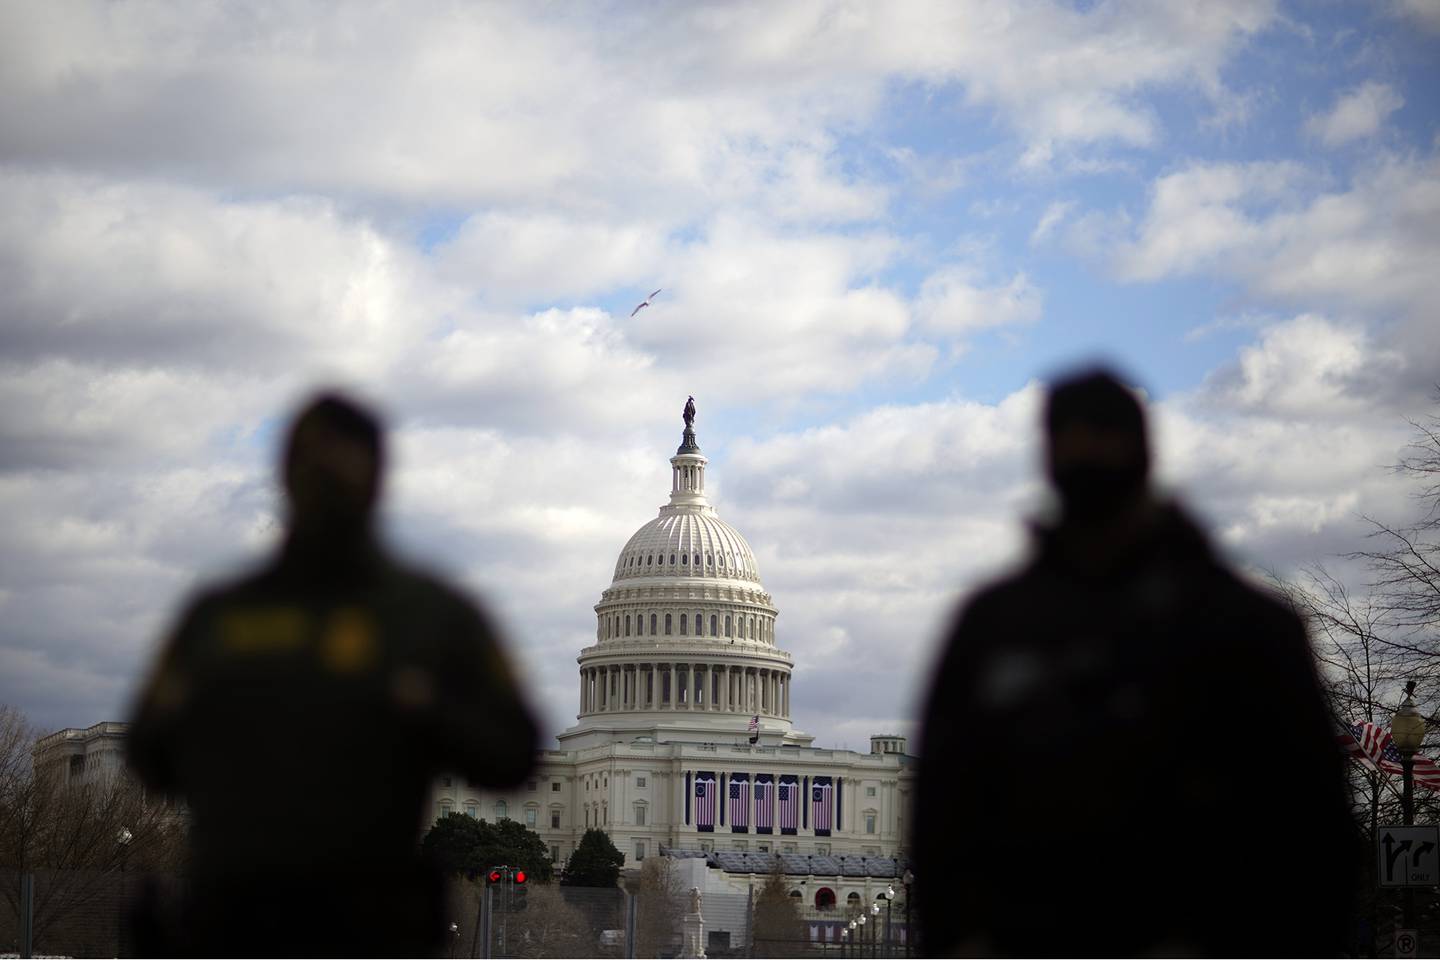 Law enforcement stand near the Capitol ahead of the inauguration of President-elect Joe Biden and Vice President-elect Kamala Harris, Sunday, Jan. 17, 2021, in Washington.